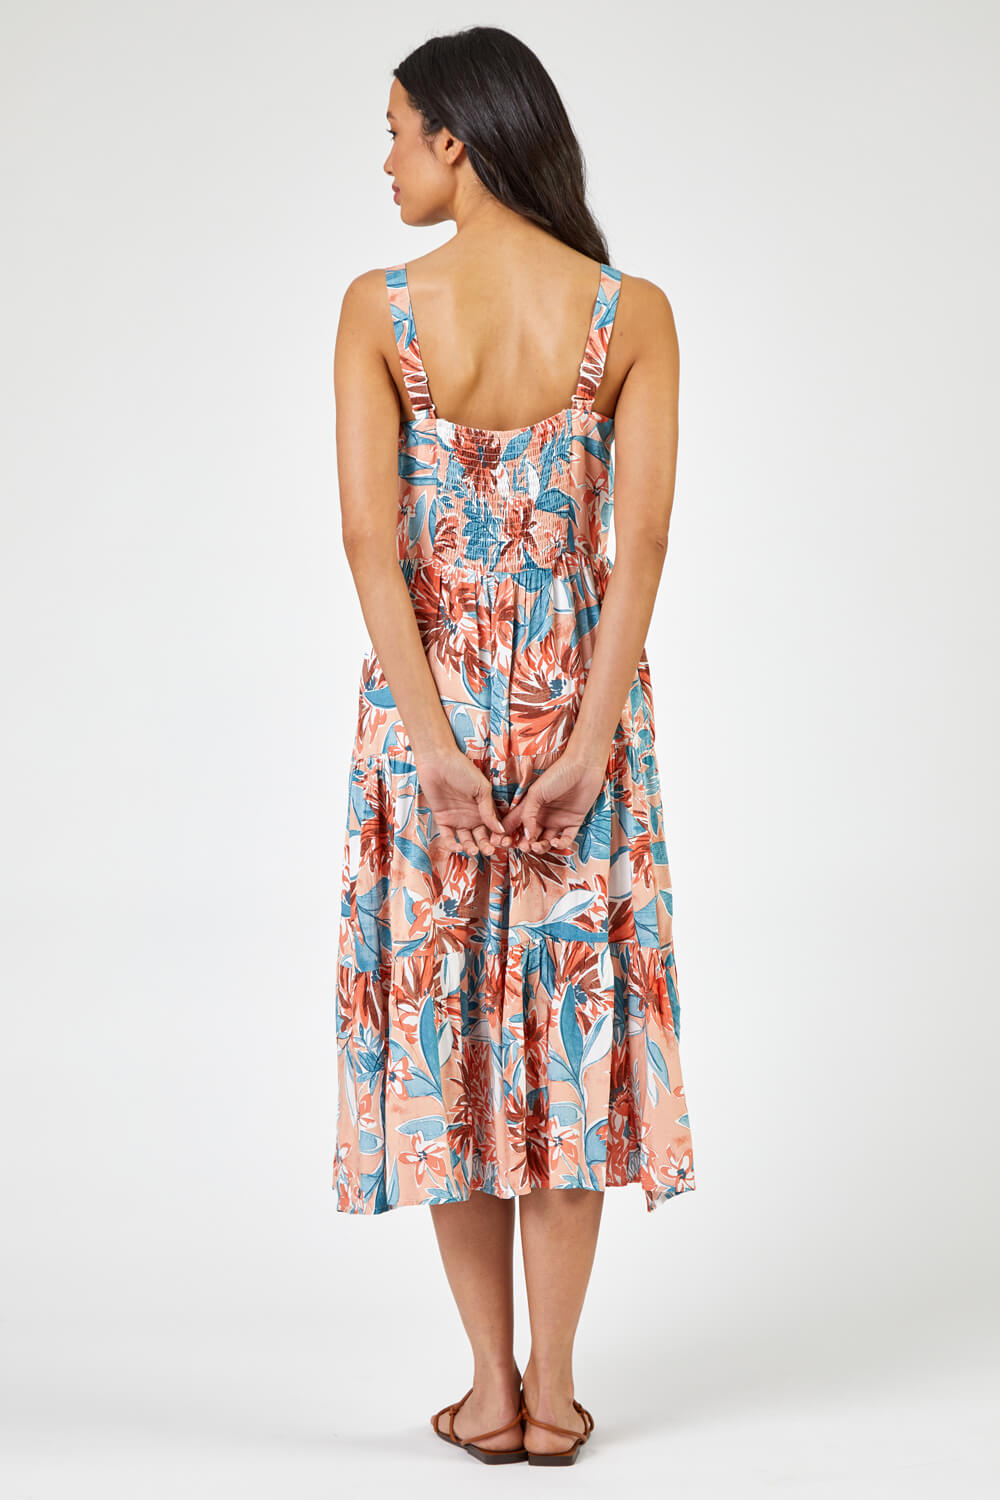 CORAL Tropical Floral Tiered Pocket Midi Dress, Image 2 of 5